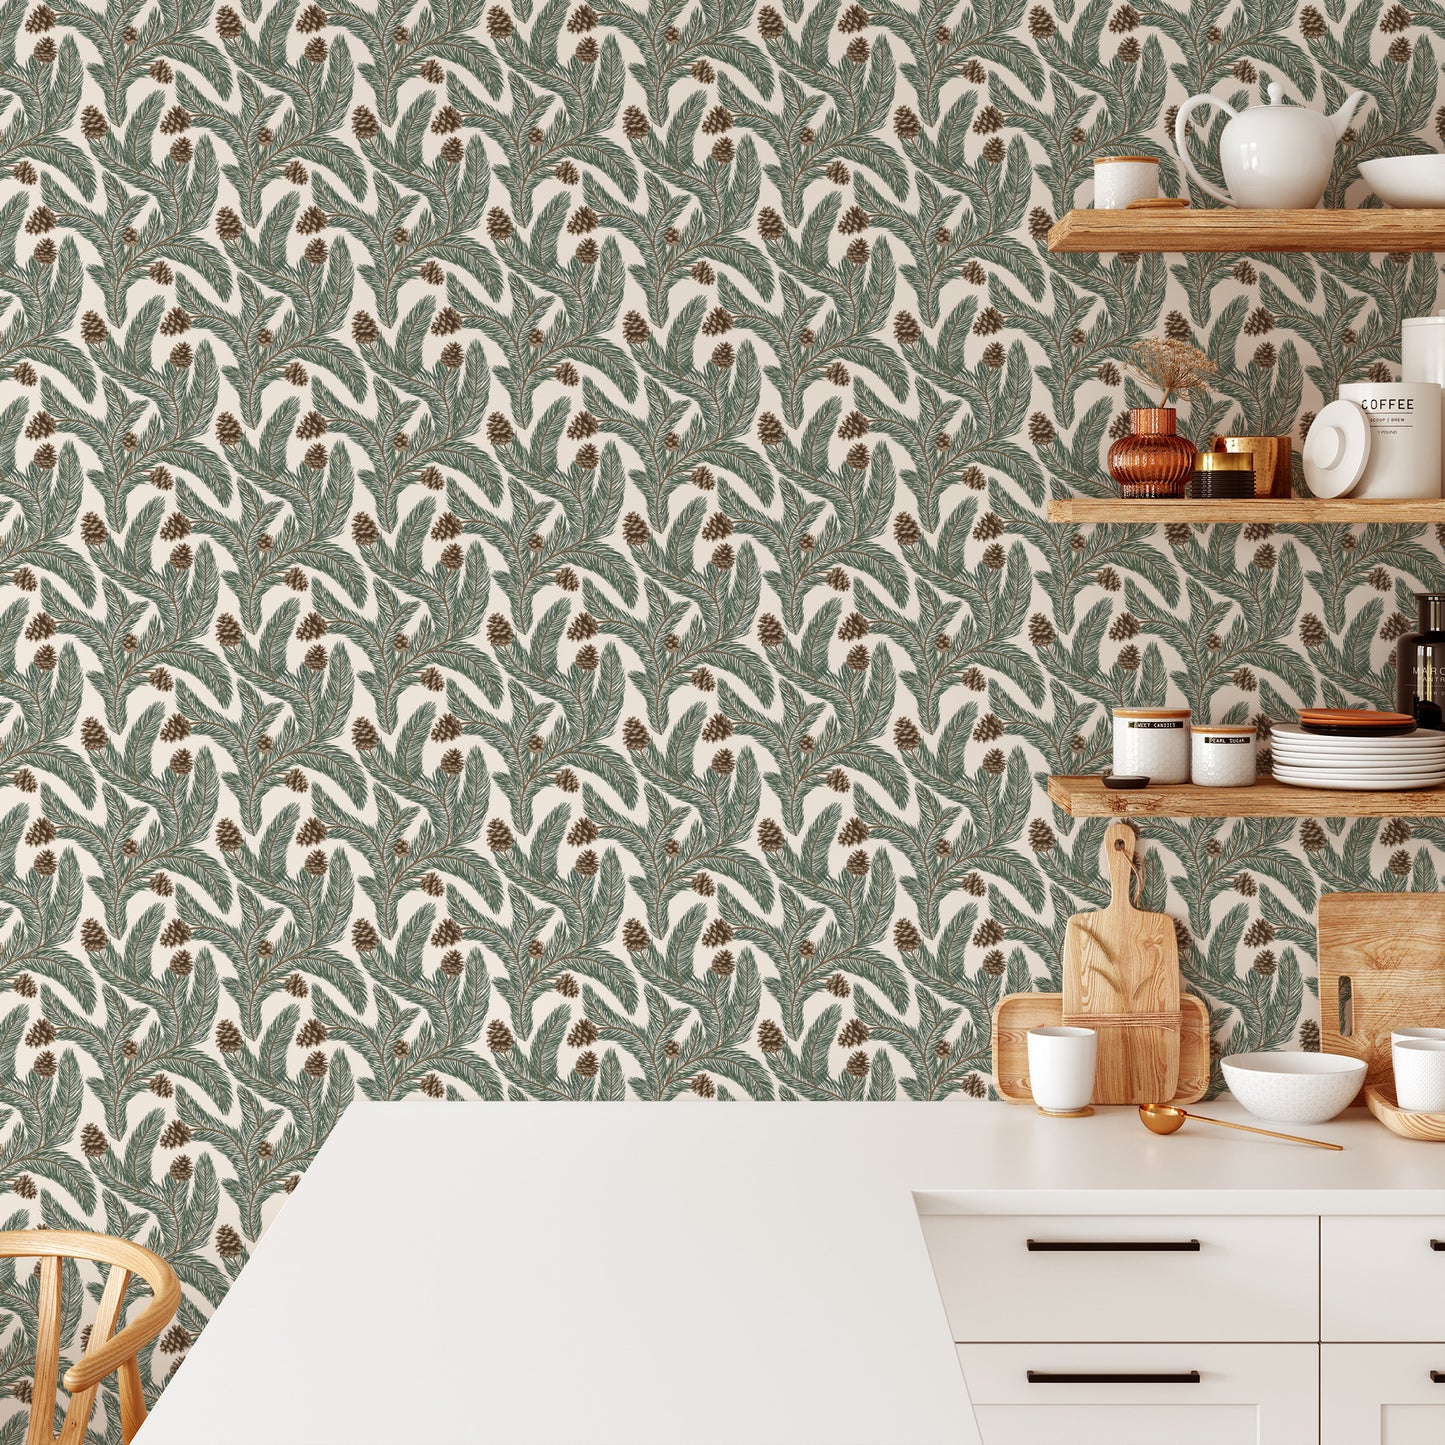 Bedroom featuring Cayla Naylor Sitka- Snow Peel and Stick Wallpaper - a nature inspired pattern